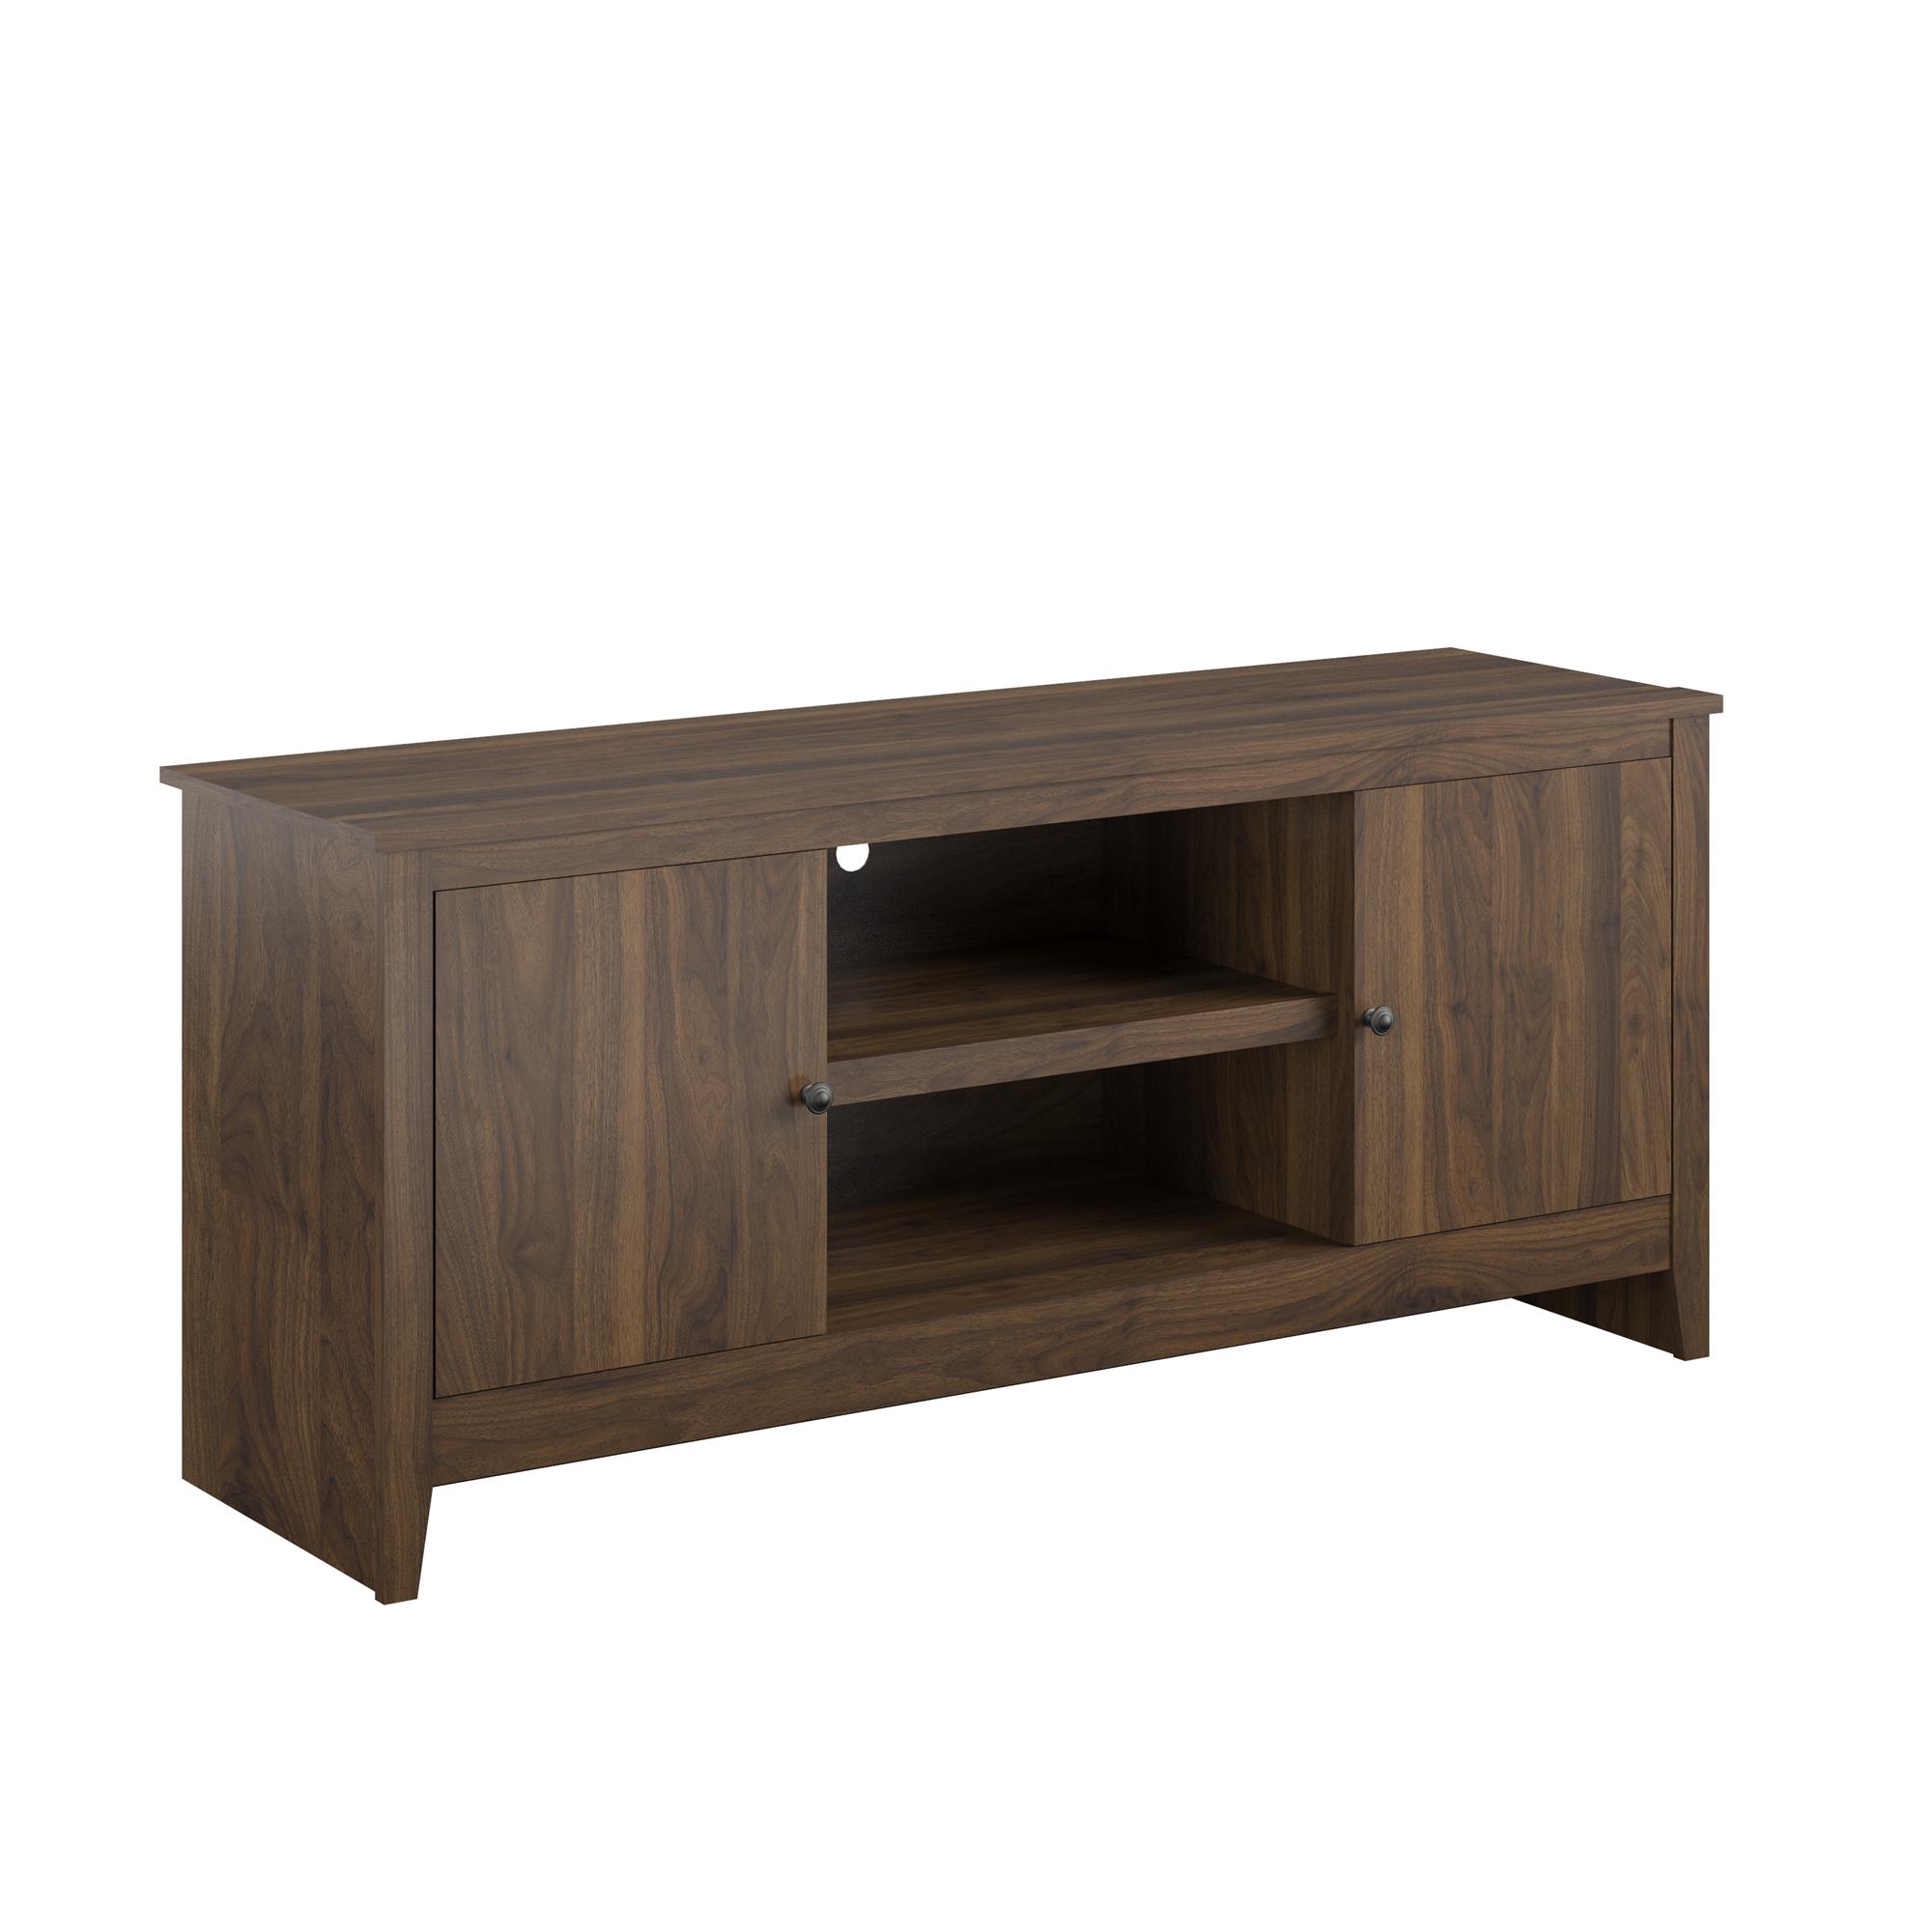 Mainstays TV Stand for TVs up to 65", Walnut - image 4 of 11